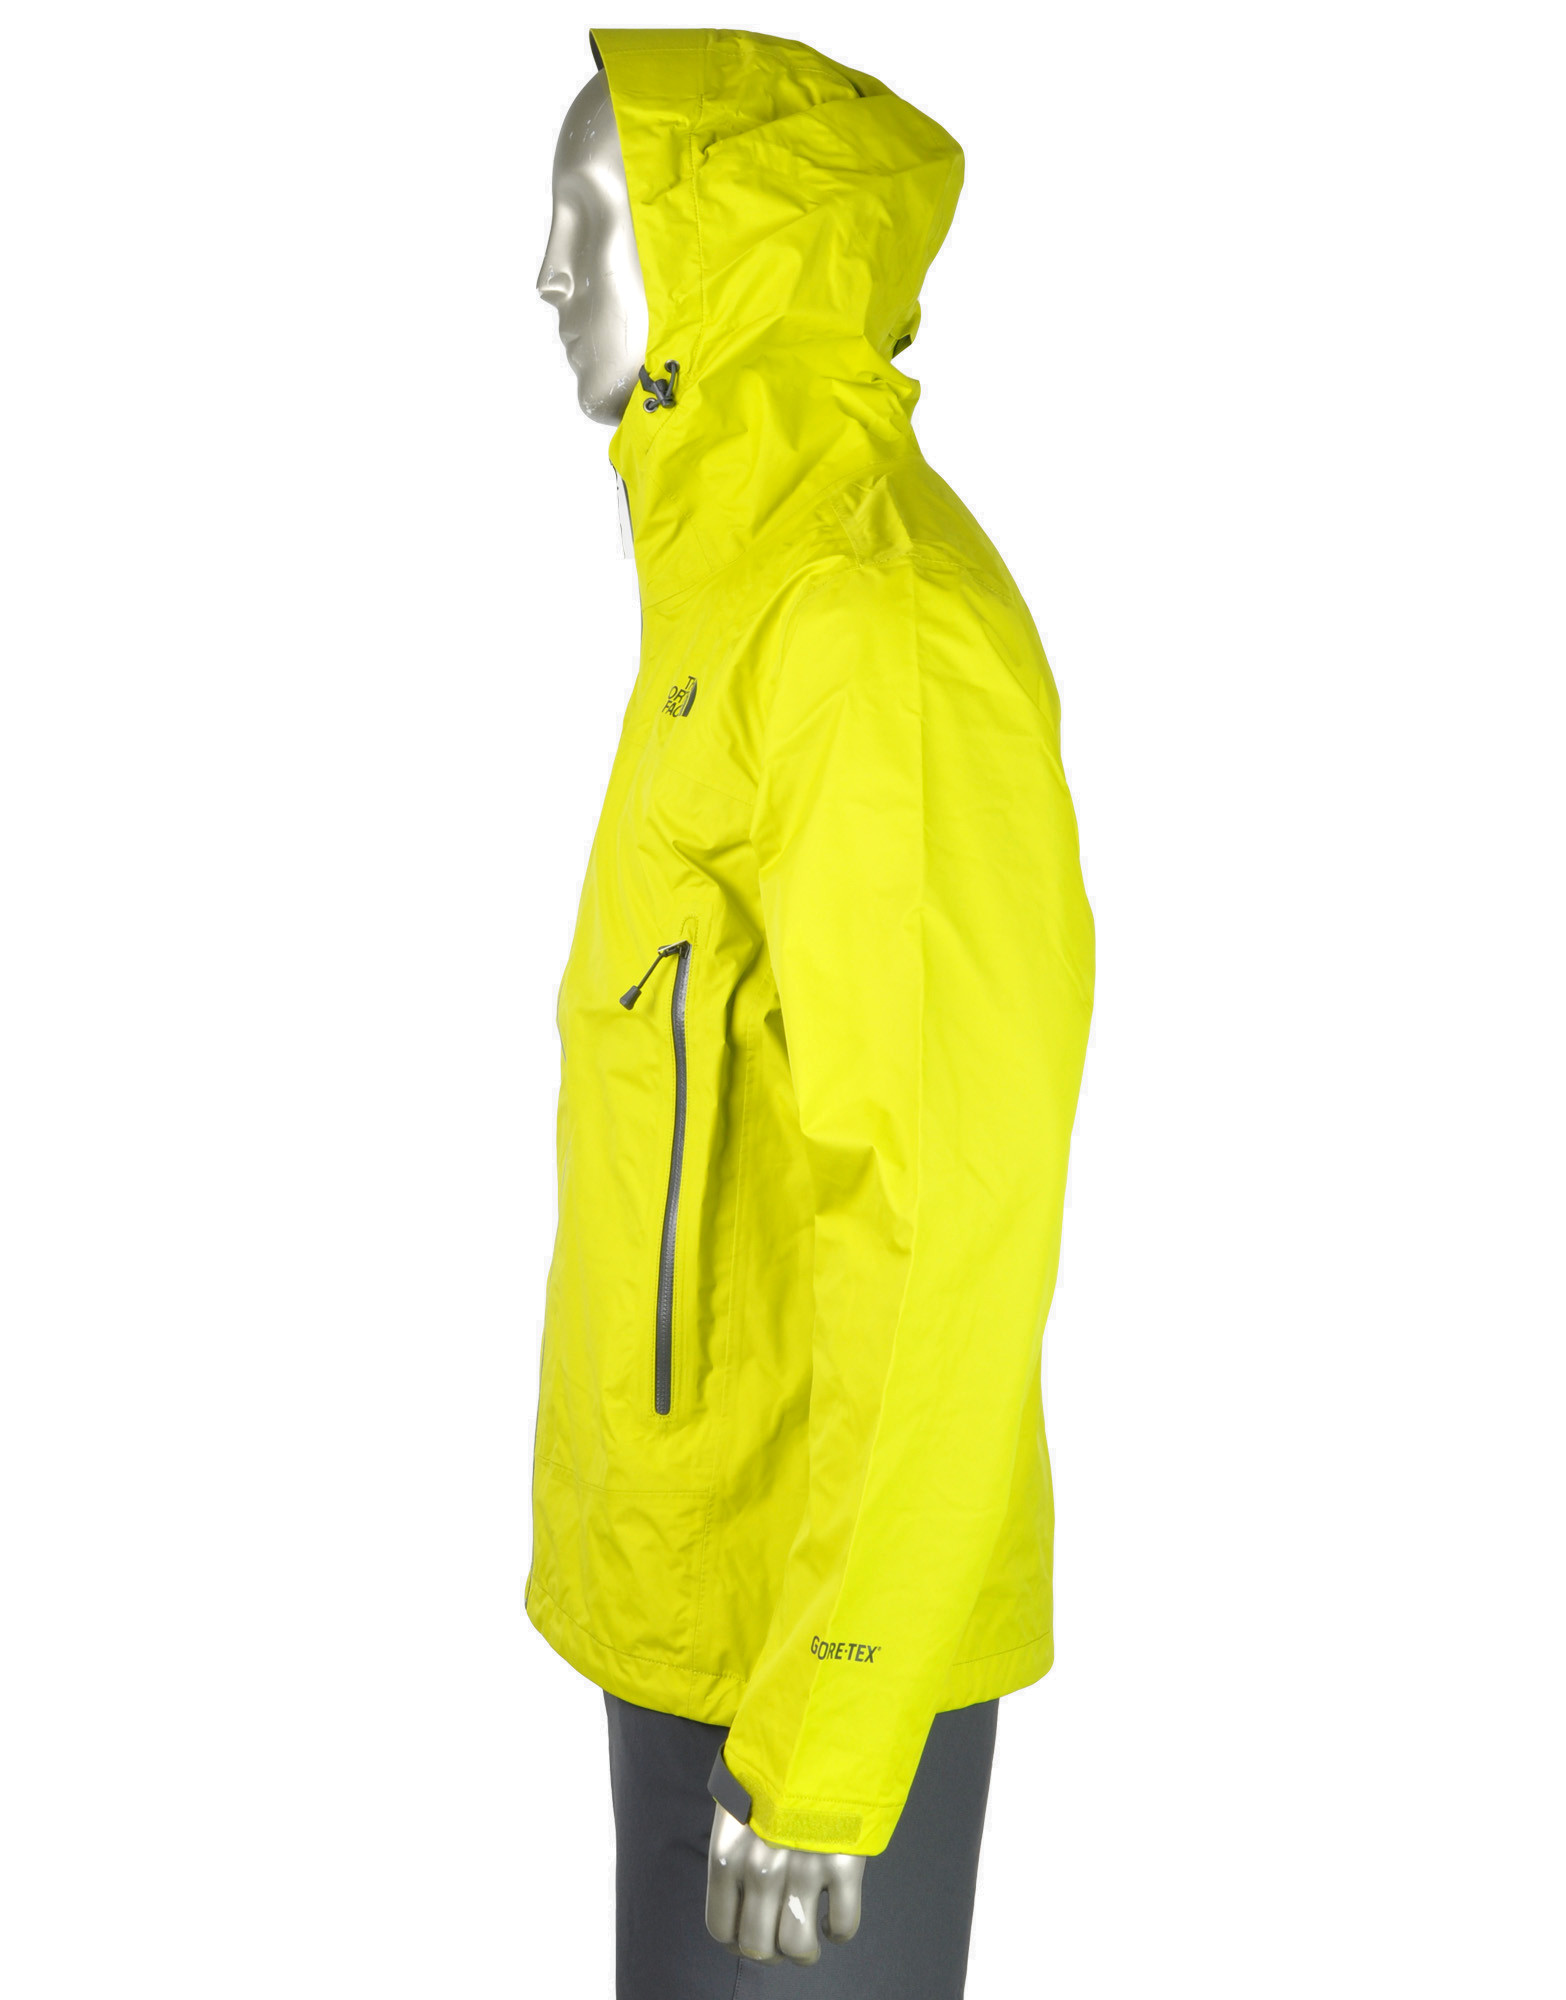 M Blue Ridge Paclite Jacket By The North Face Colour Yellow Iafstore Com